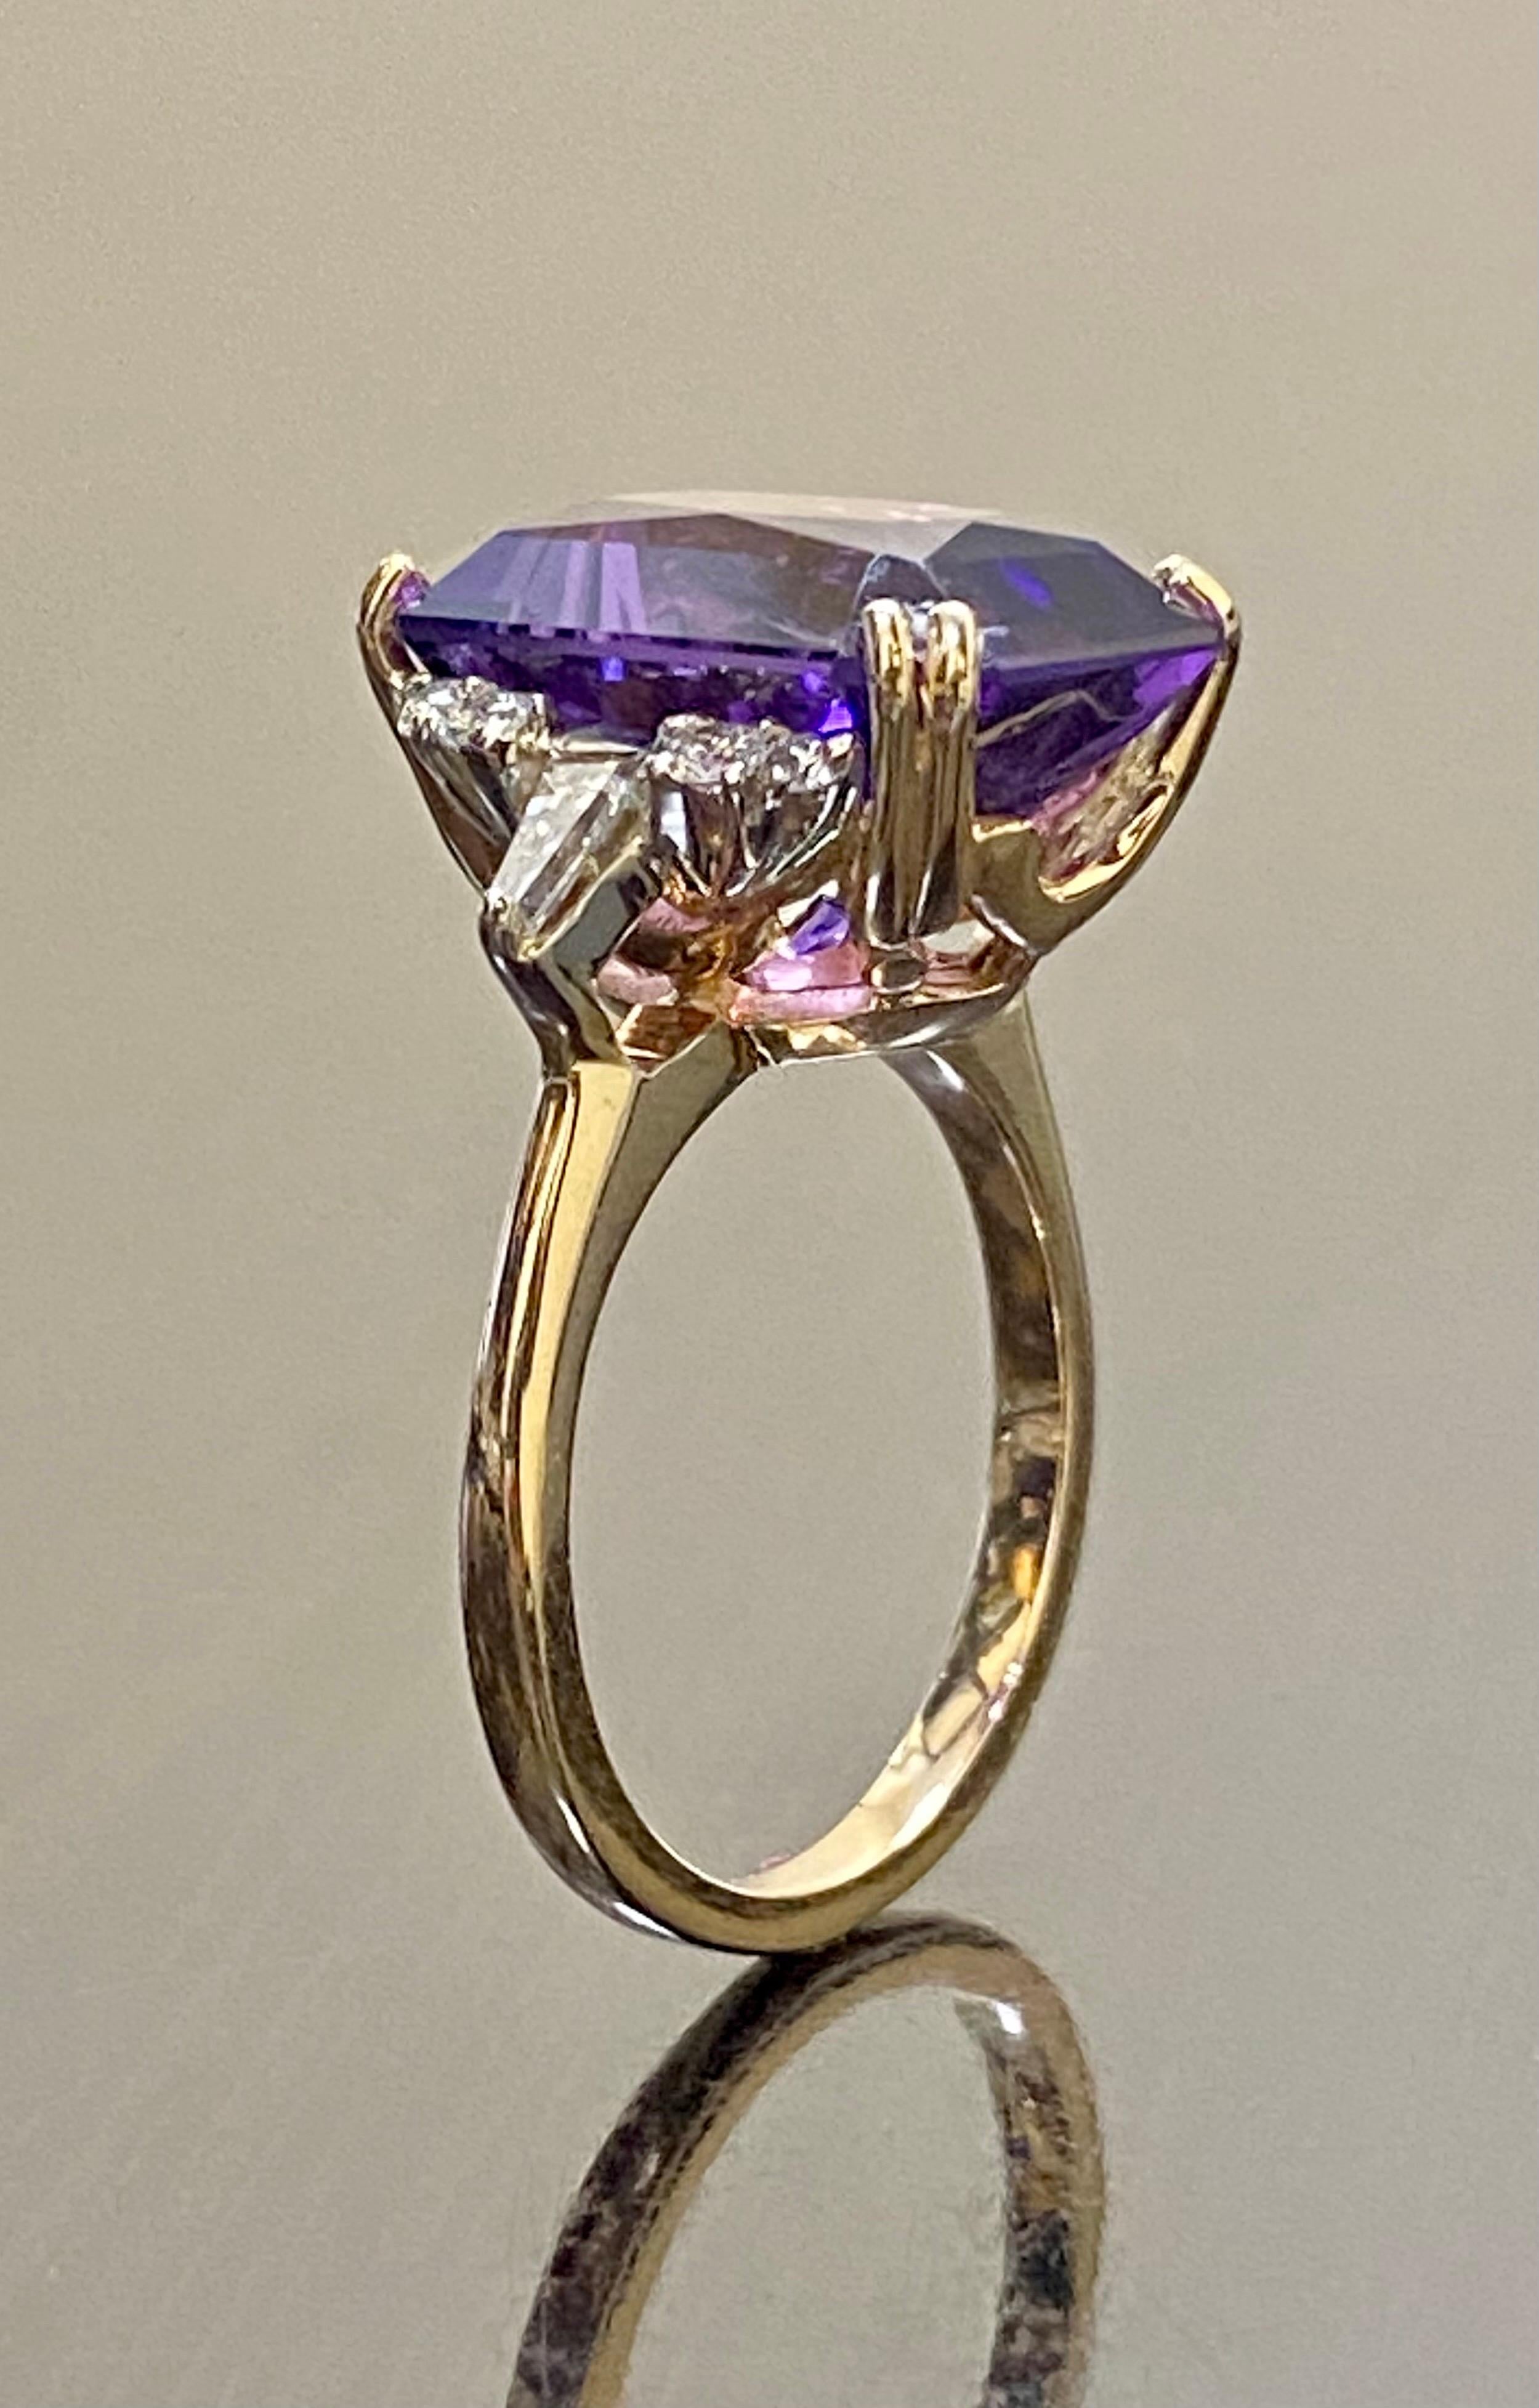 DeKara Designs Collection

Metal- 14K Rose Gold, .583.

Stones- Natural Radiant Cut Amethyst 9.12 Carats, 2 Tapered Baguettes, 8 Round Diamonds G-H Color VS2 Clarity, 0.35 Carats.

Size- 6 3/4. FREE SIZING!!!!

Beautiful Handmade Art Deco Inspired